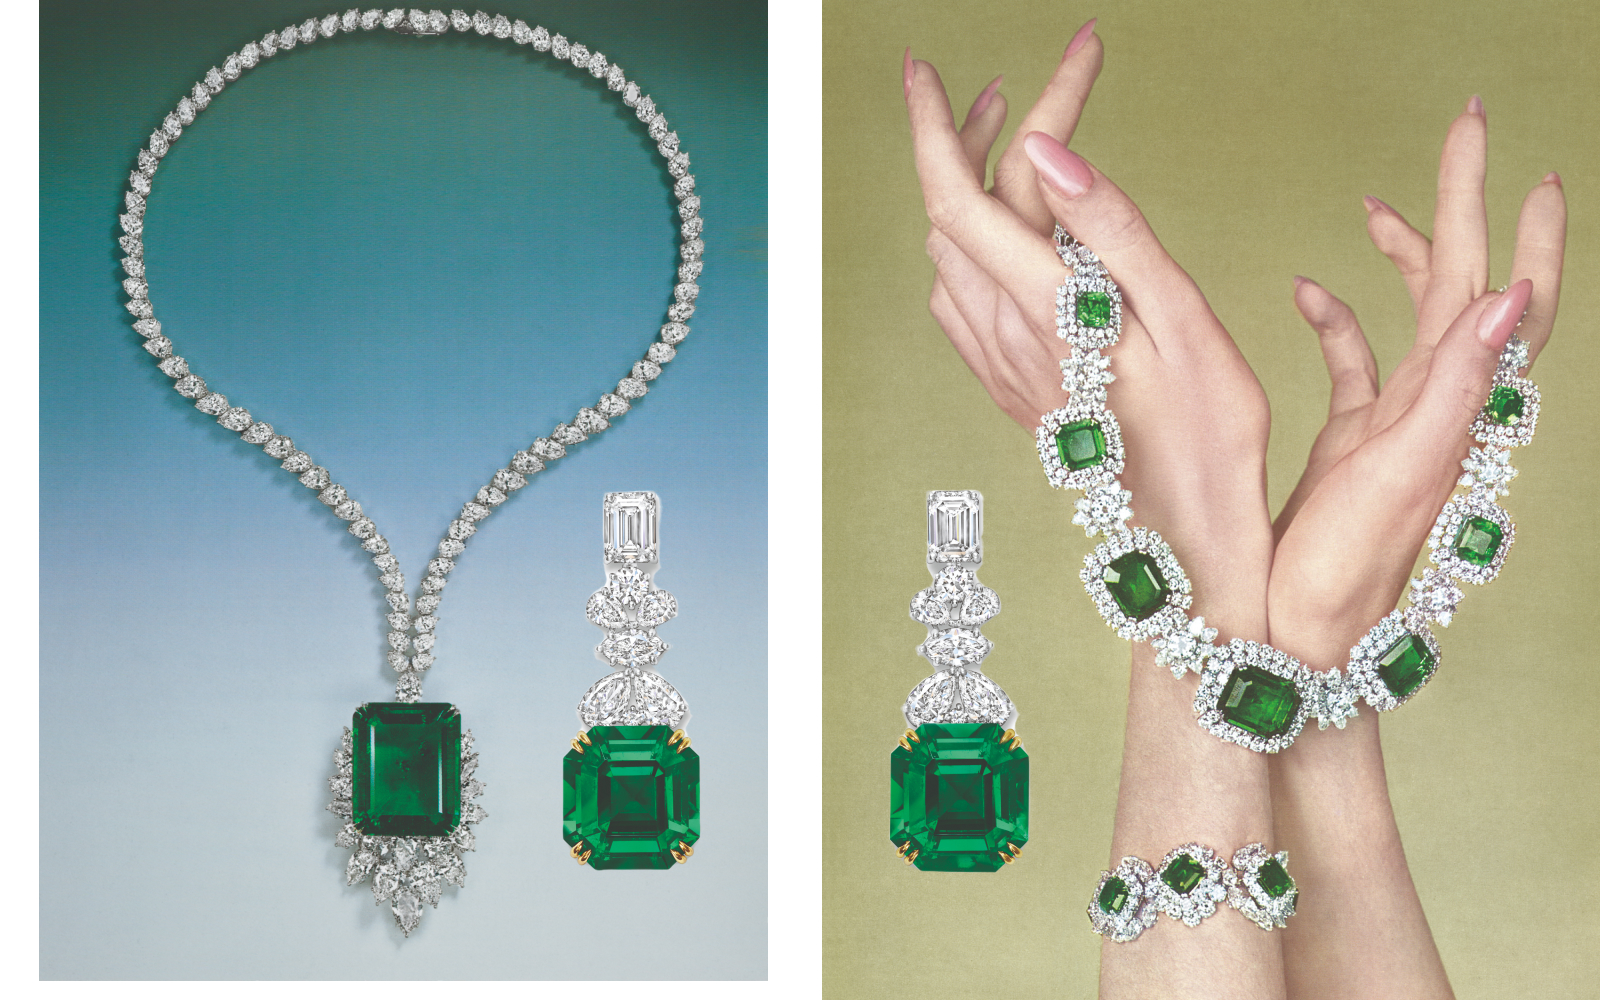  Harry Winston The Court Emerald earrings in gold, white gold, emerald and diamonds from the Royal Adornments collection were inspired by a necklace belonging to the Maharajah of Nawanagar 